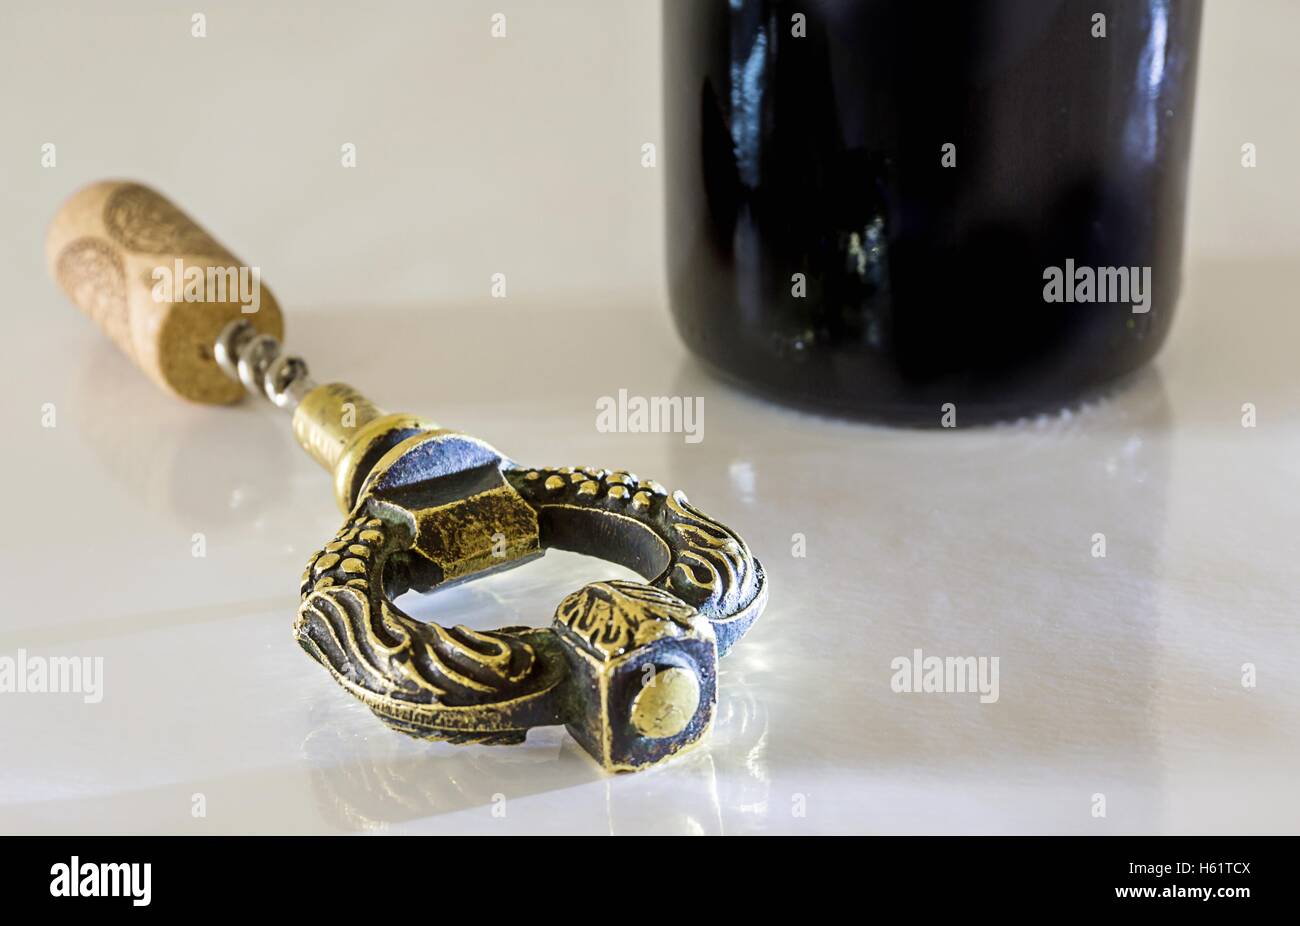 Corkscrew by the bottle of red wine Stock Photo